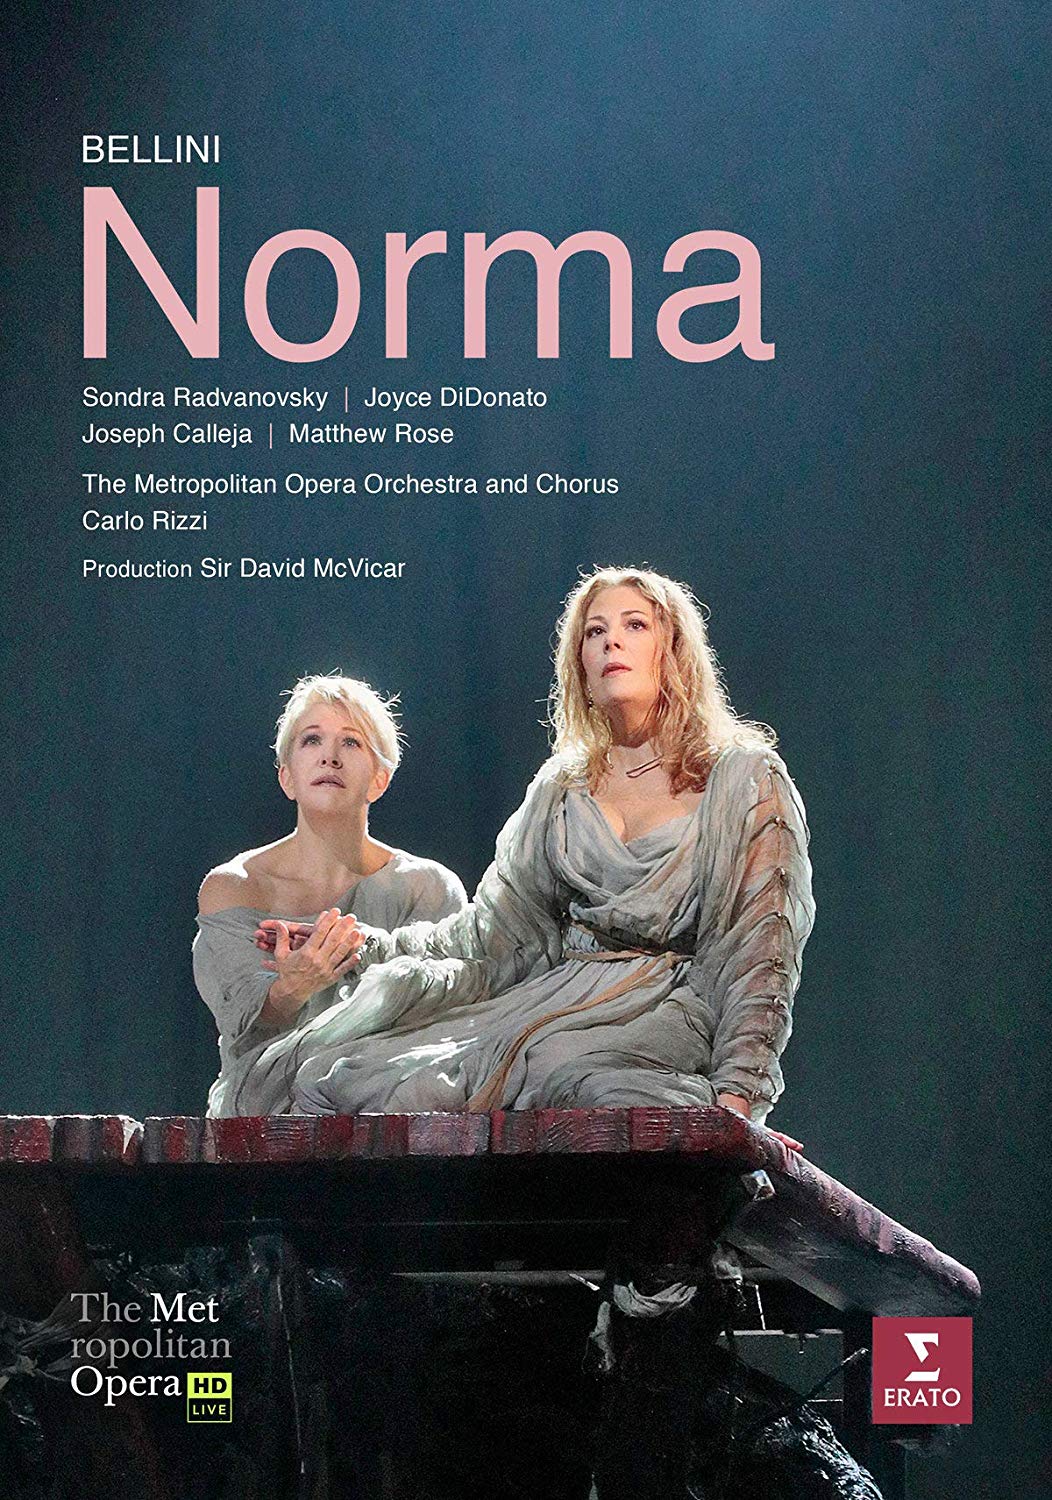 Metropolitan Opera’s ‘Norma’ To Be Released On DVD